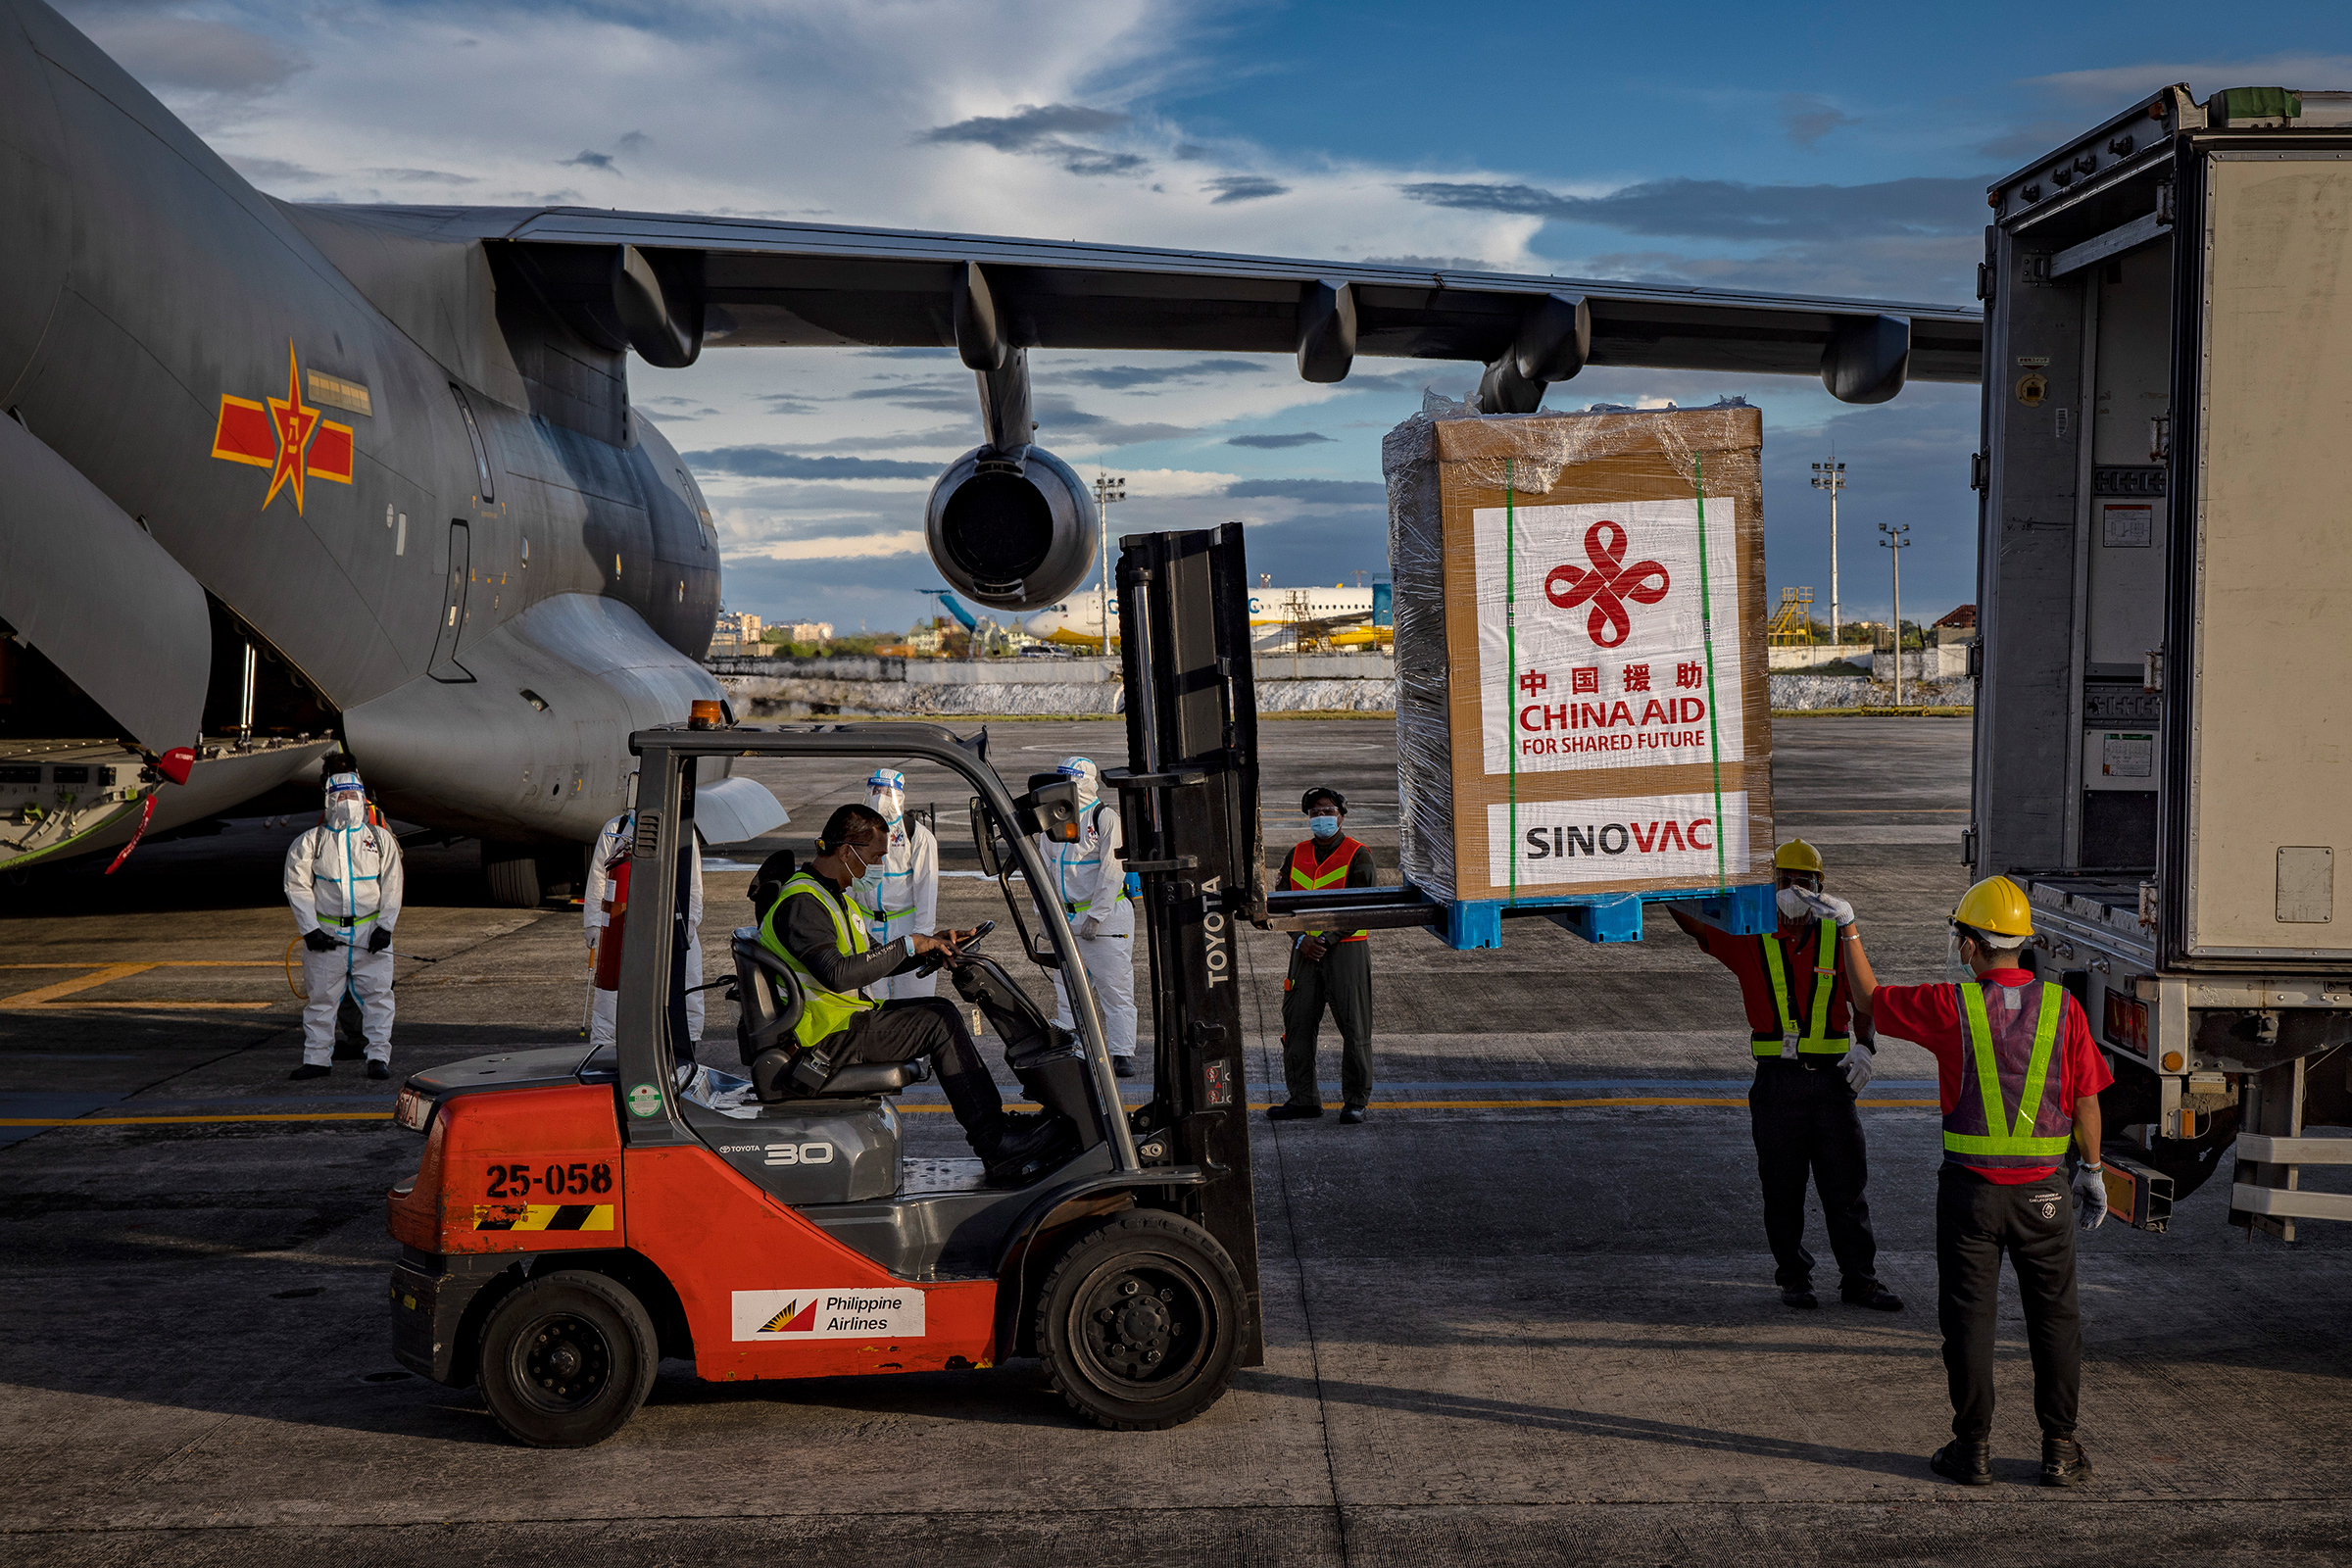 A crate containing Sinovac Biotech COVID-19 vaccines is loaded into a truck upon arriving at Ninoy Aquino International Airport on Feb. 28, 2021 in Manila. Sunday's delivery marks the first time the Philippines received official coronavirus vaccines, the last country in ASEAN to do so (Ezra Acayan—Getty Images)